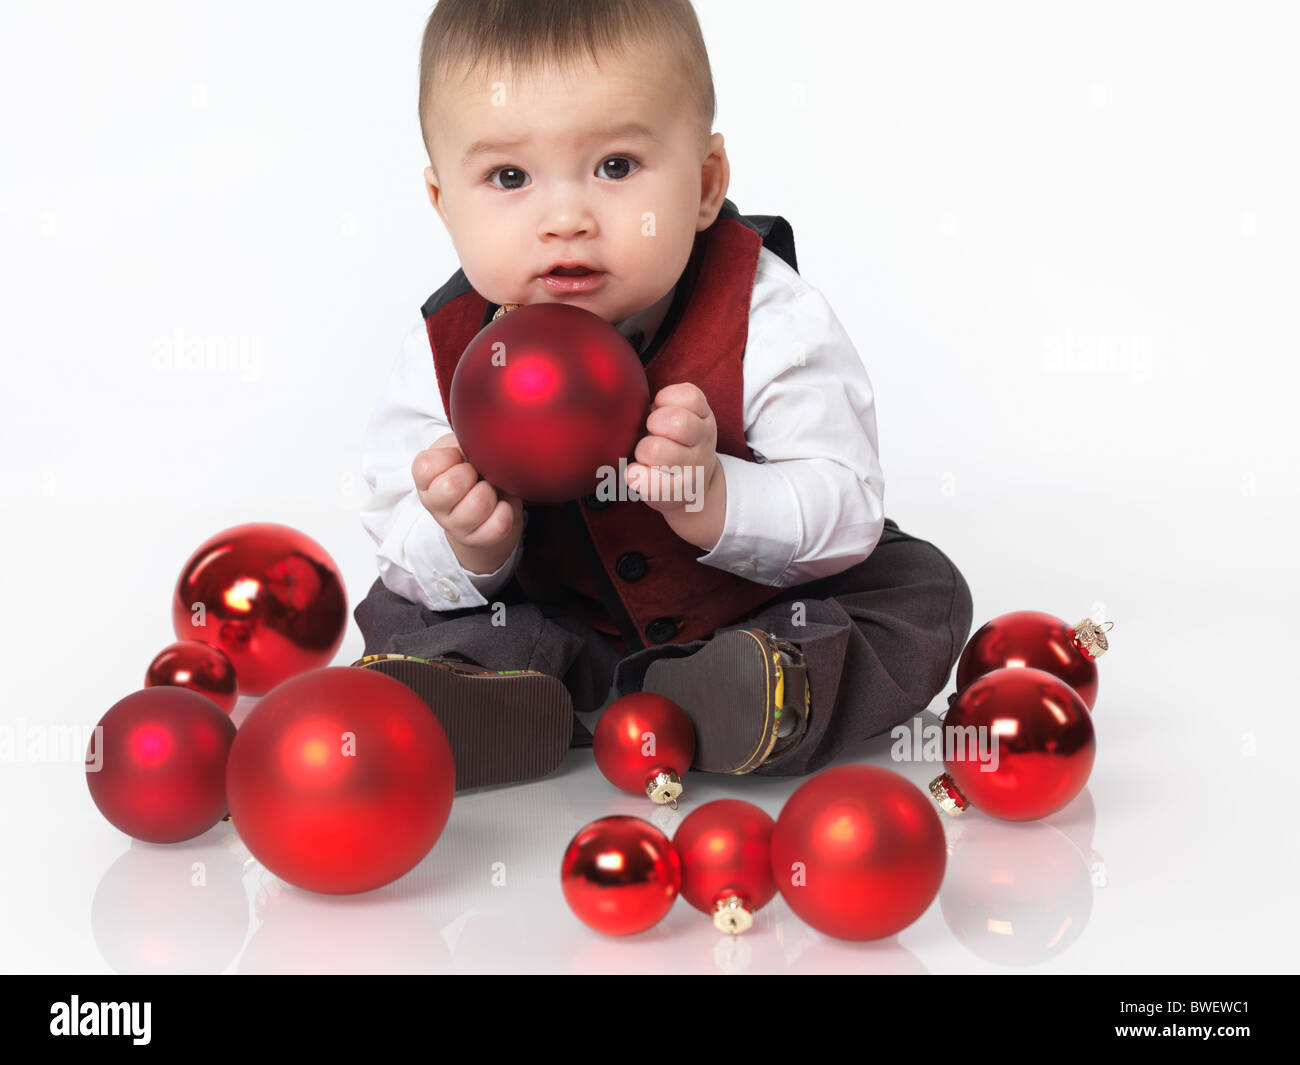 Six month old baby boy sitting with a red bauble Christmas decoration in his hands. Isolated on white background. Stock Photo